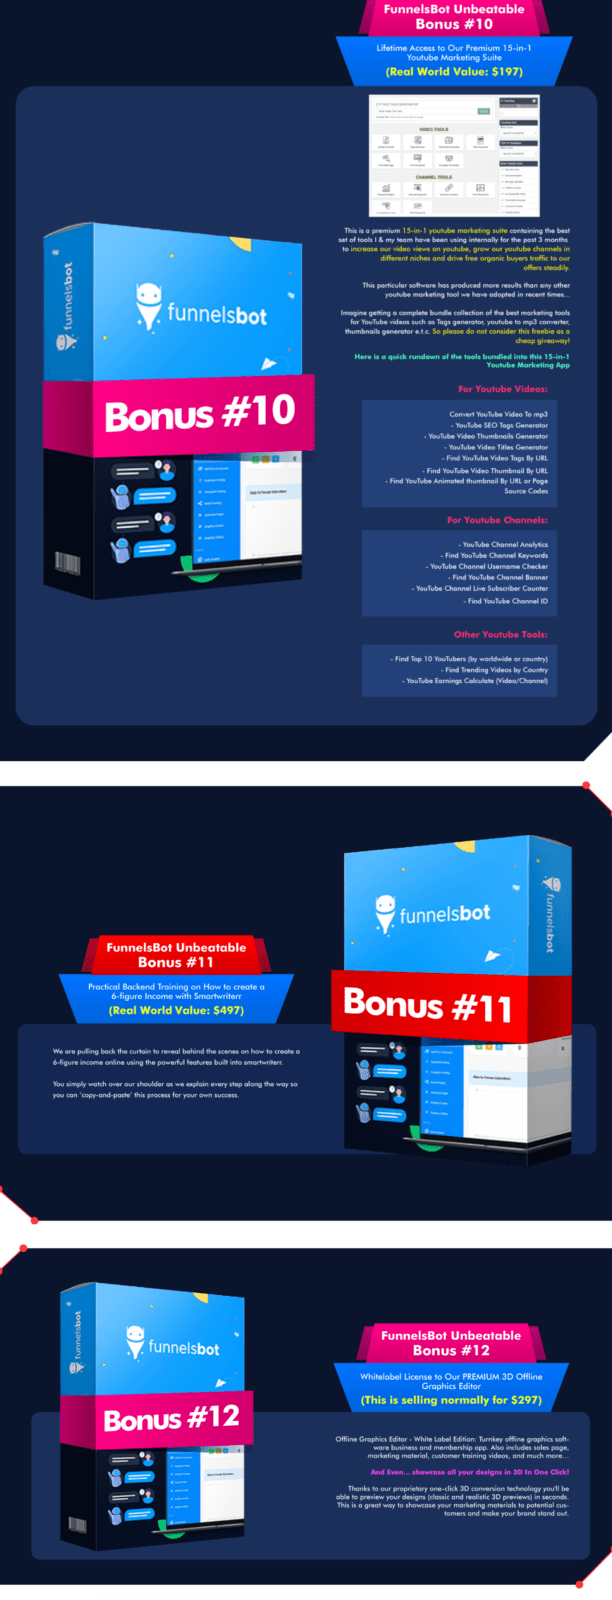 FunnelsBot mm FunnelsBot: Unlock The Power Of ‘A.I and Machine Learning Technology’ To Help You Drive Red-Hot Traffic 24/7 tom your business,– Generate – Engage – And Convert Traffic Into Red-Hot Customers in Just 3 Steps! #digitalmarketing #digitalnarketer